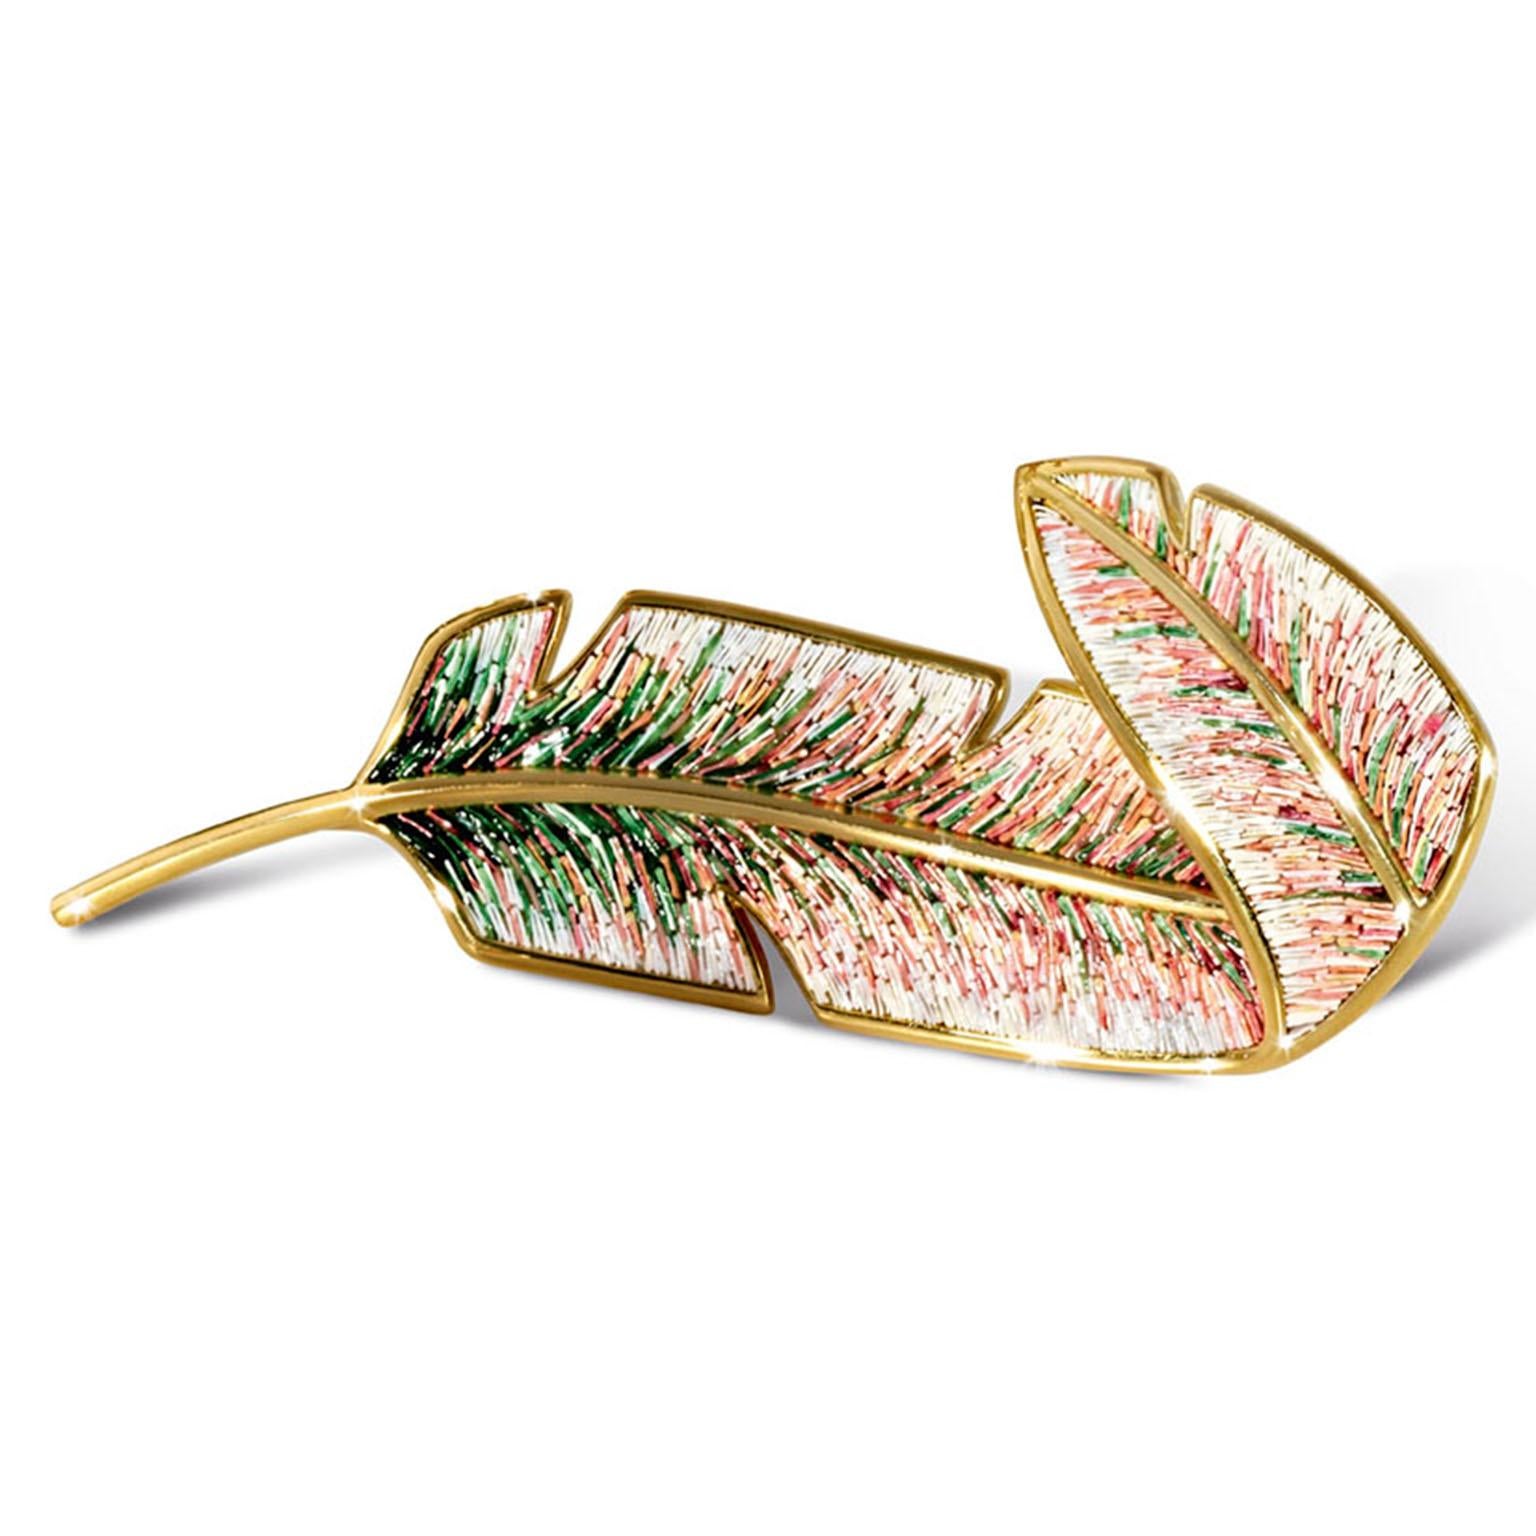 Stylish Brooch Designed by Rogers Thomas Gold and Micromosaic In New Condition For Sale In London, GB